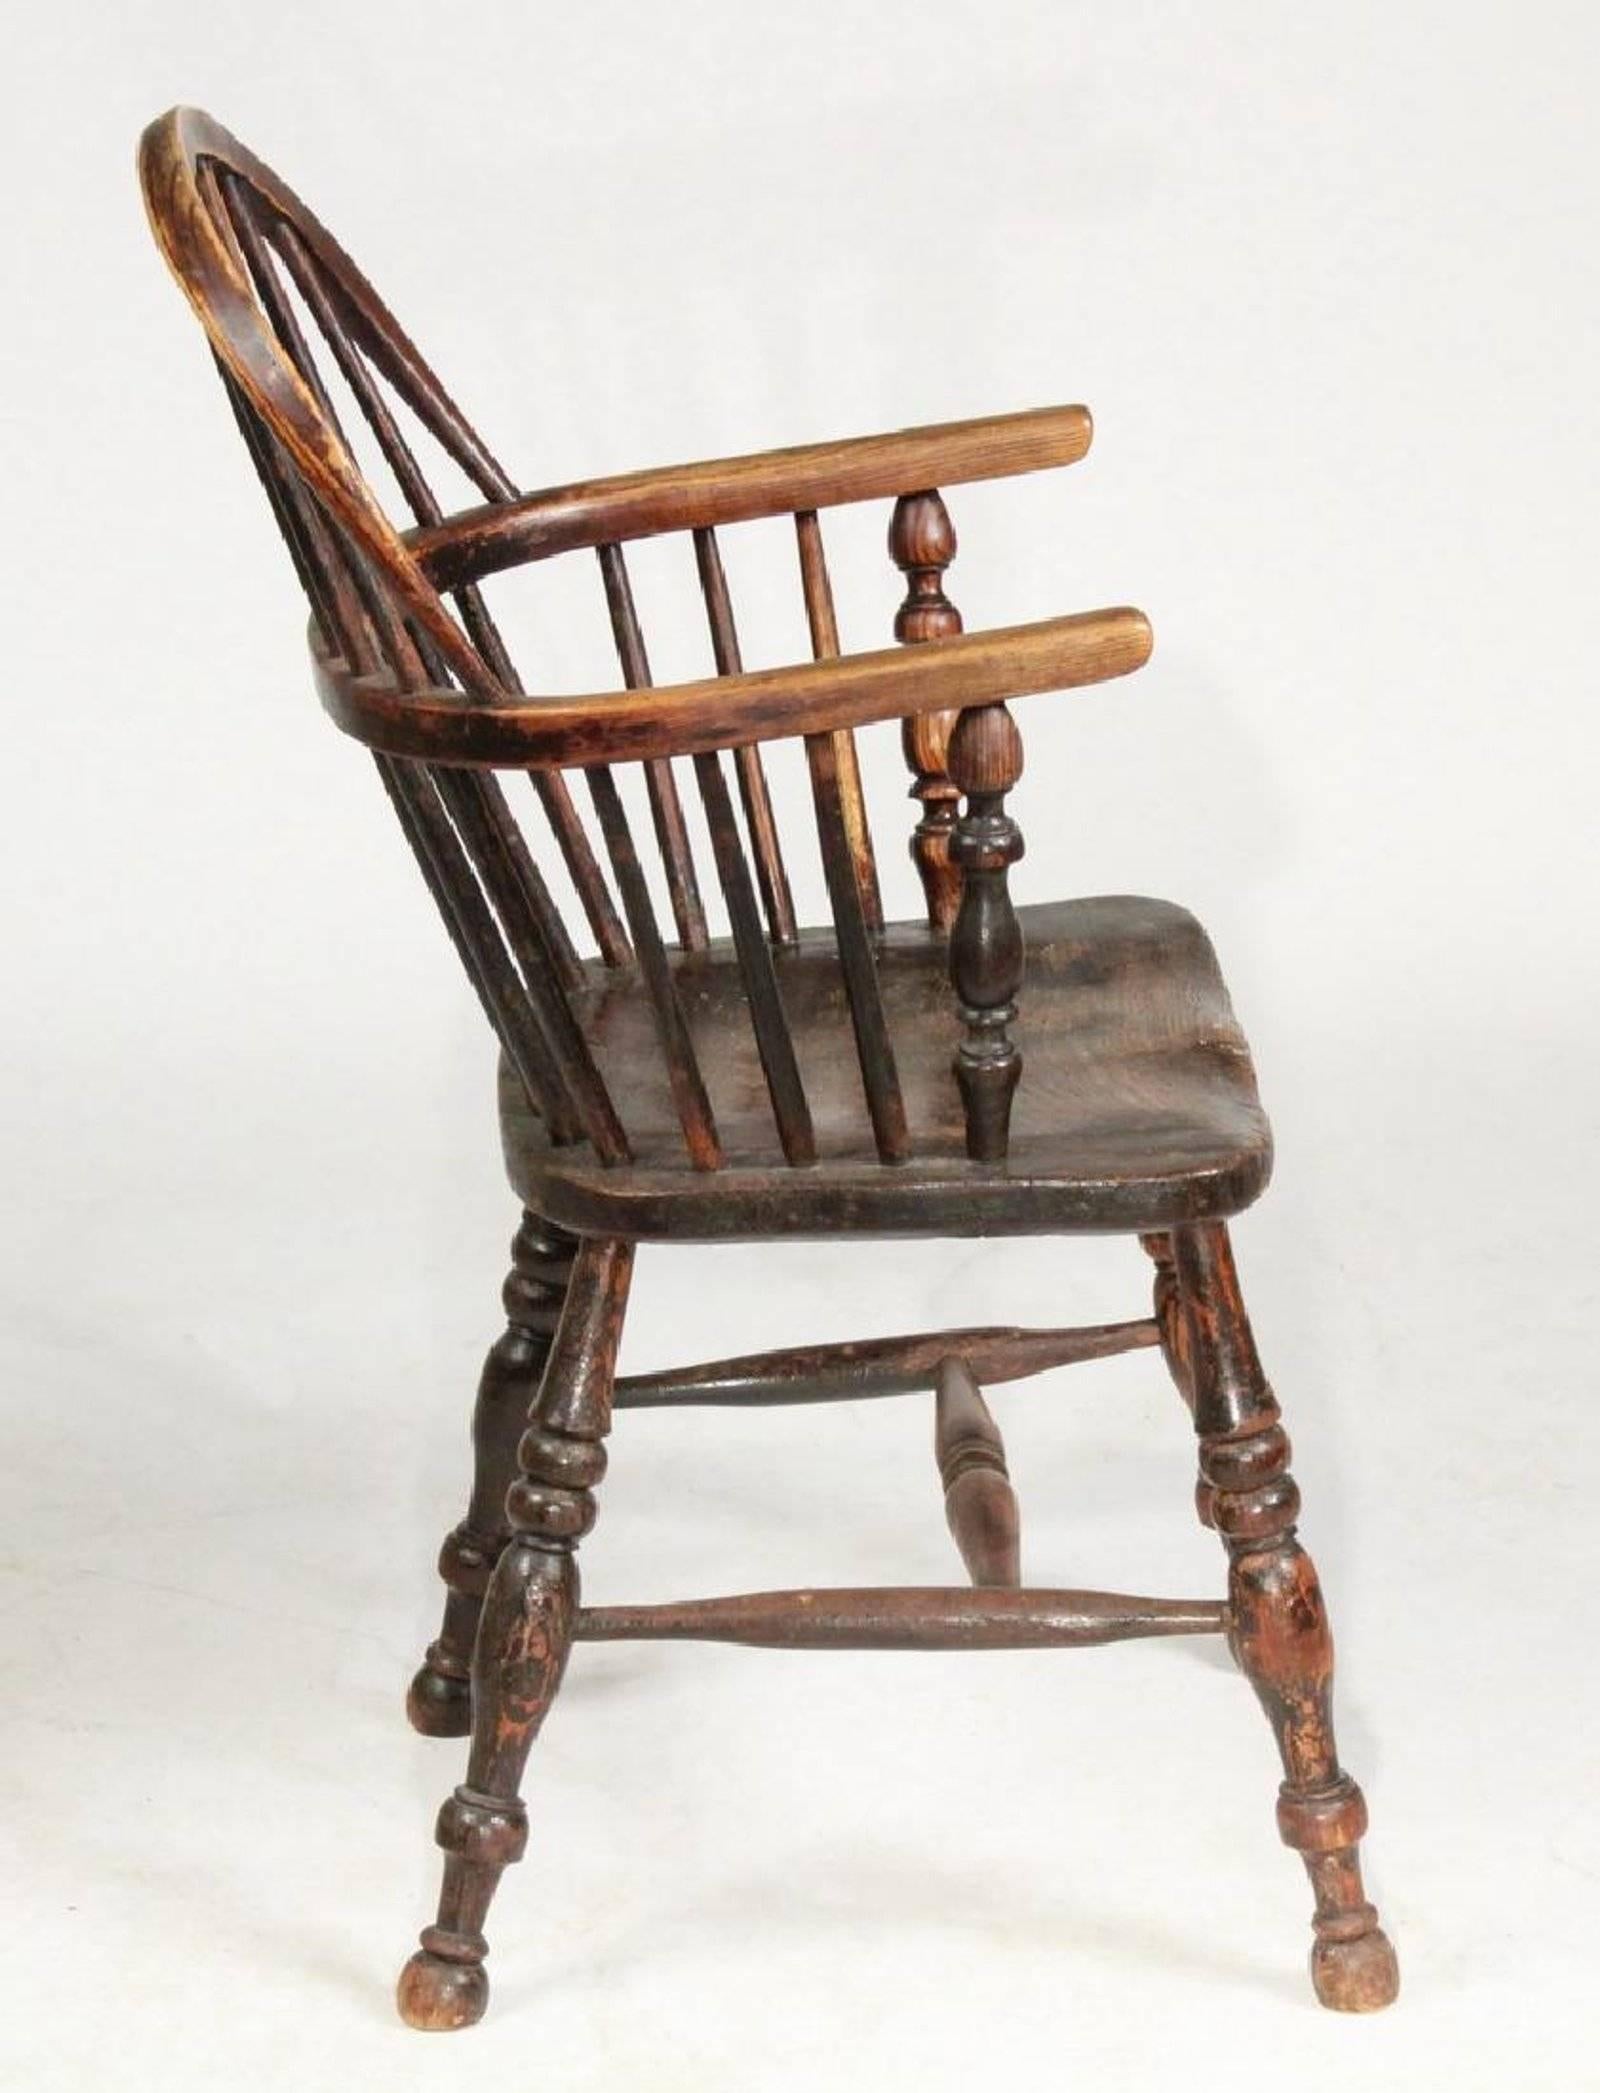 19th century rustic English bow-back Windsor chair; yew wood, bentwood and spindle back, pierced centre splat, turned supports for arms, bodged seat. 

*Typical of the chairs made in or near High Wycombe before making Windsors there became factory